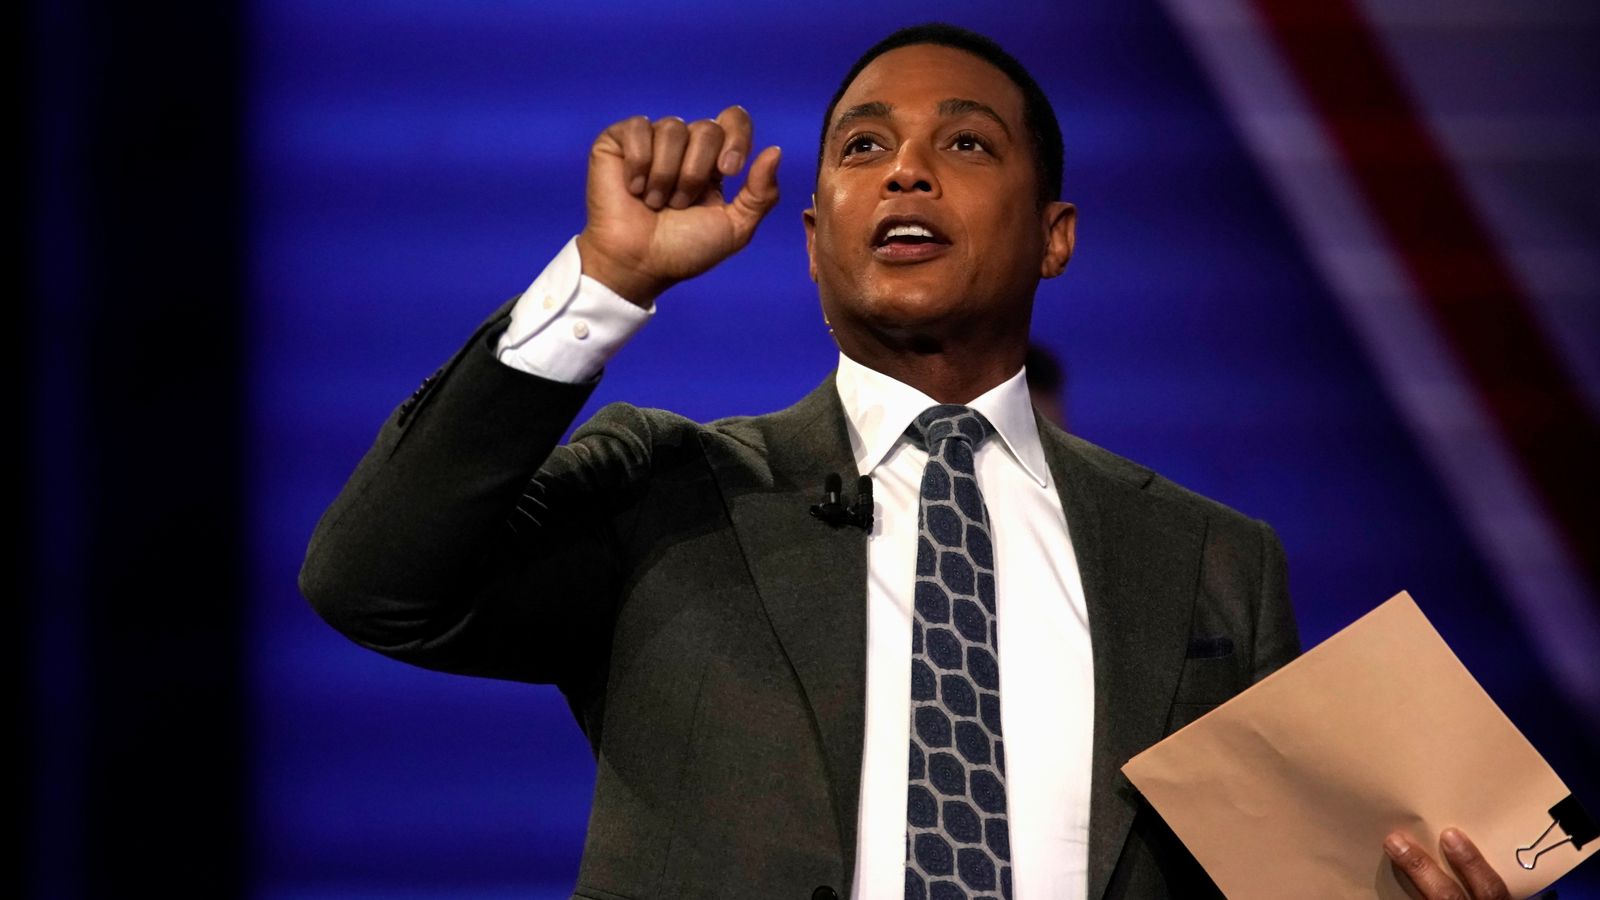 Don Lemon sacked by CNN following 'sexist' comments about Nikki Haley